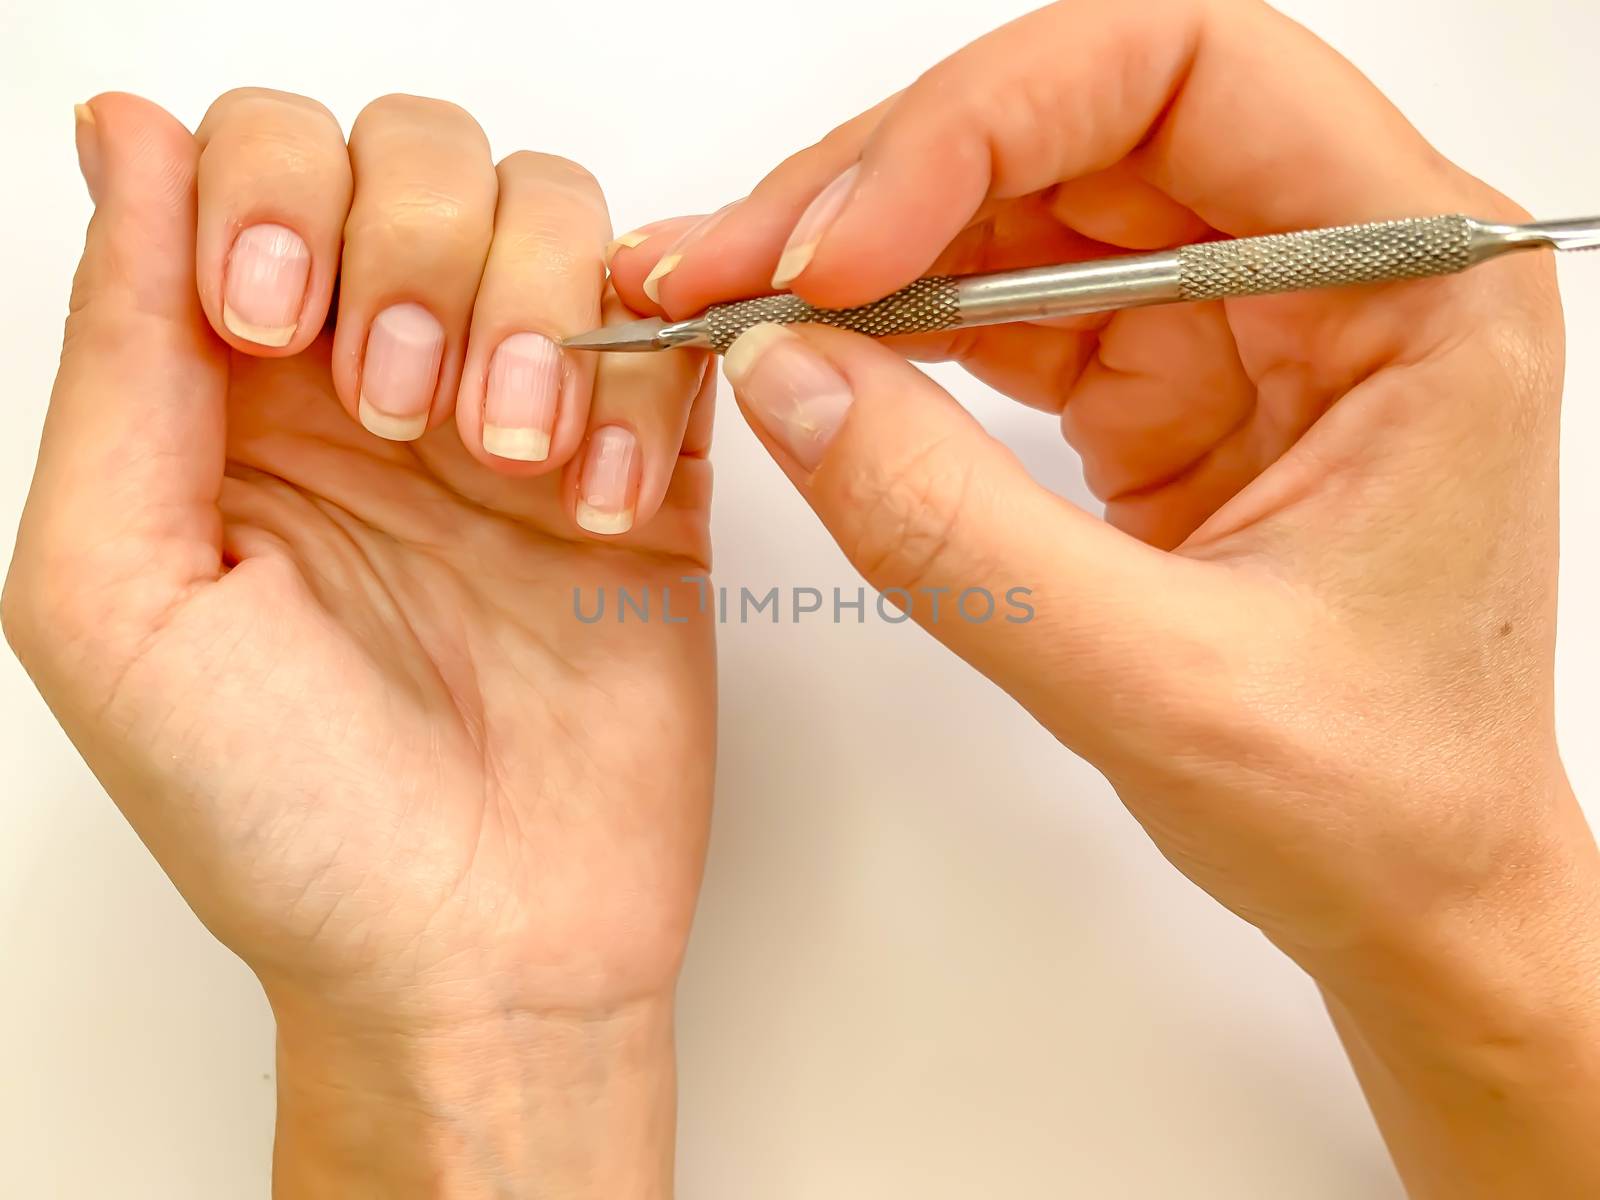 Female woman doing manicure at home on a white background by AlonaGryadovaya